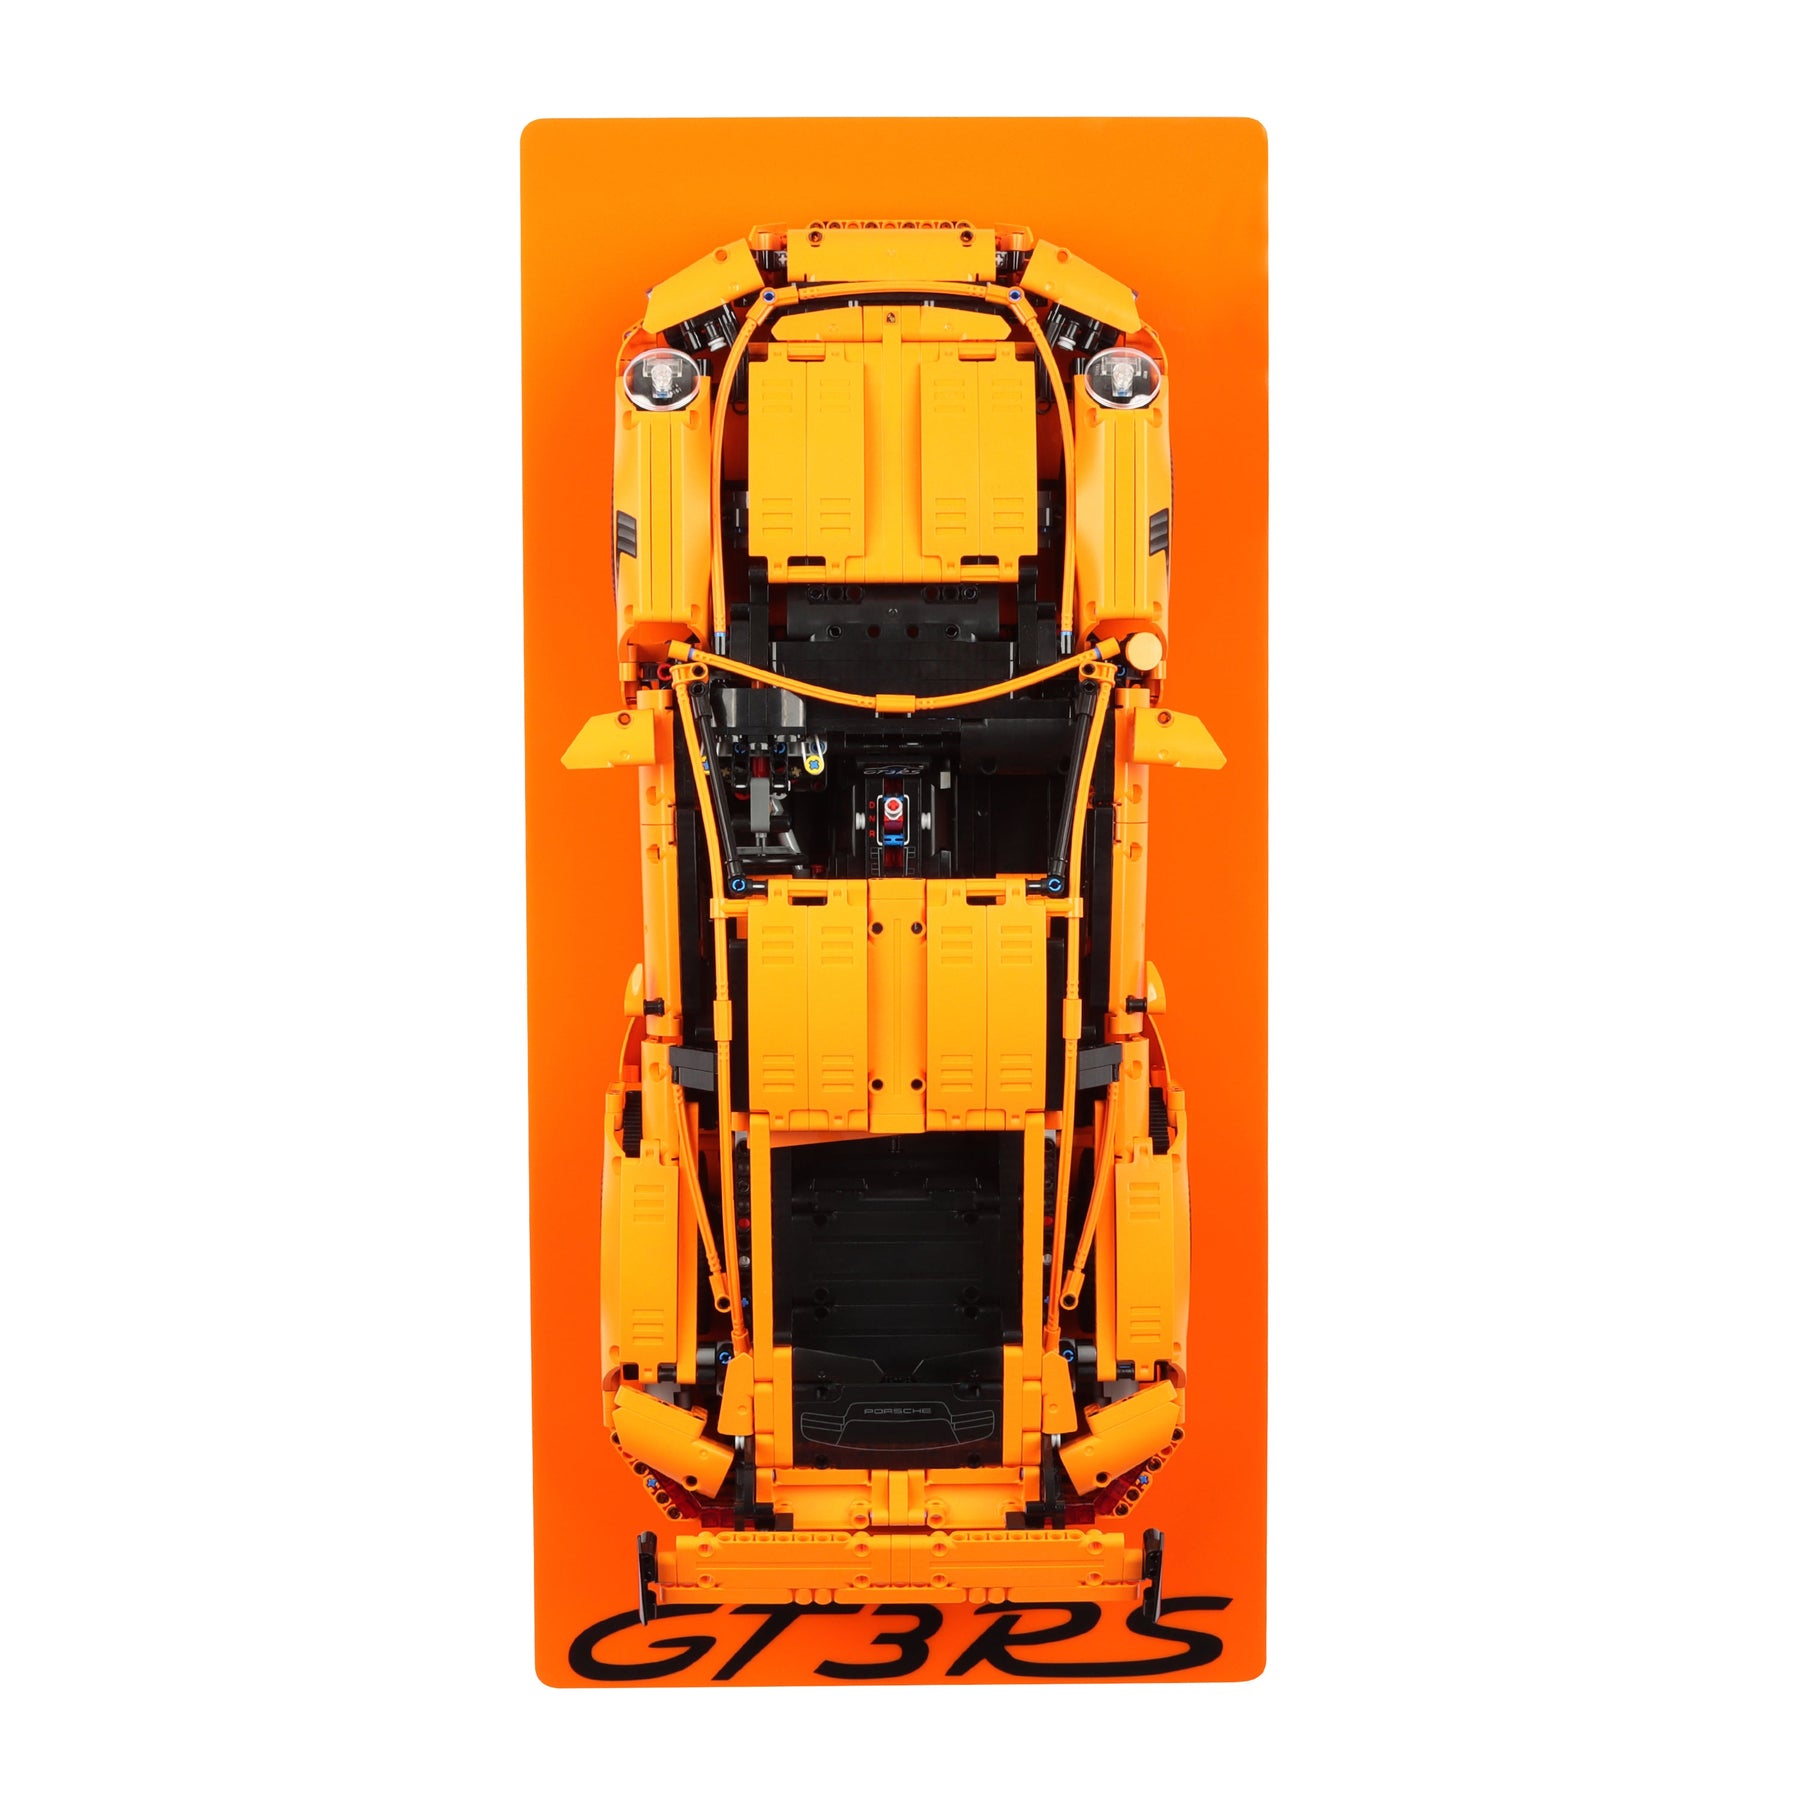 Wall display for LEGO 42056 Porsche 911 GT3 RS